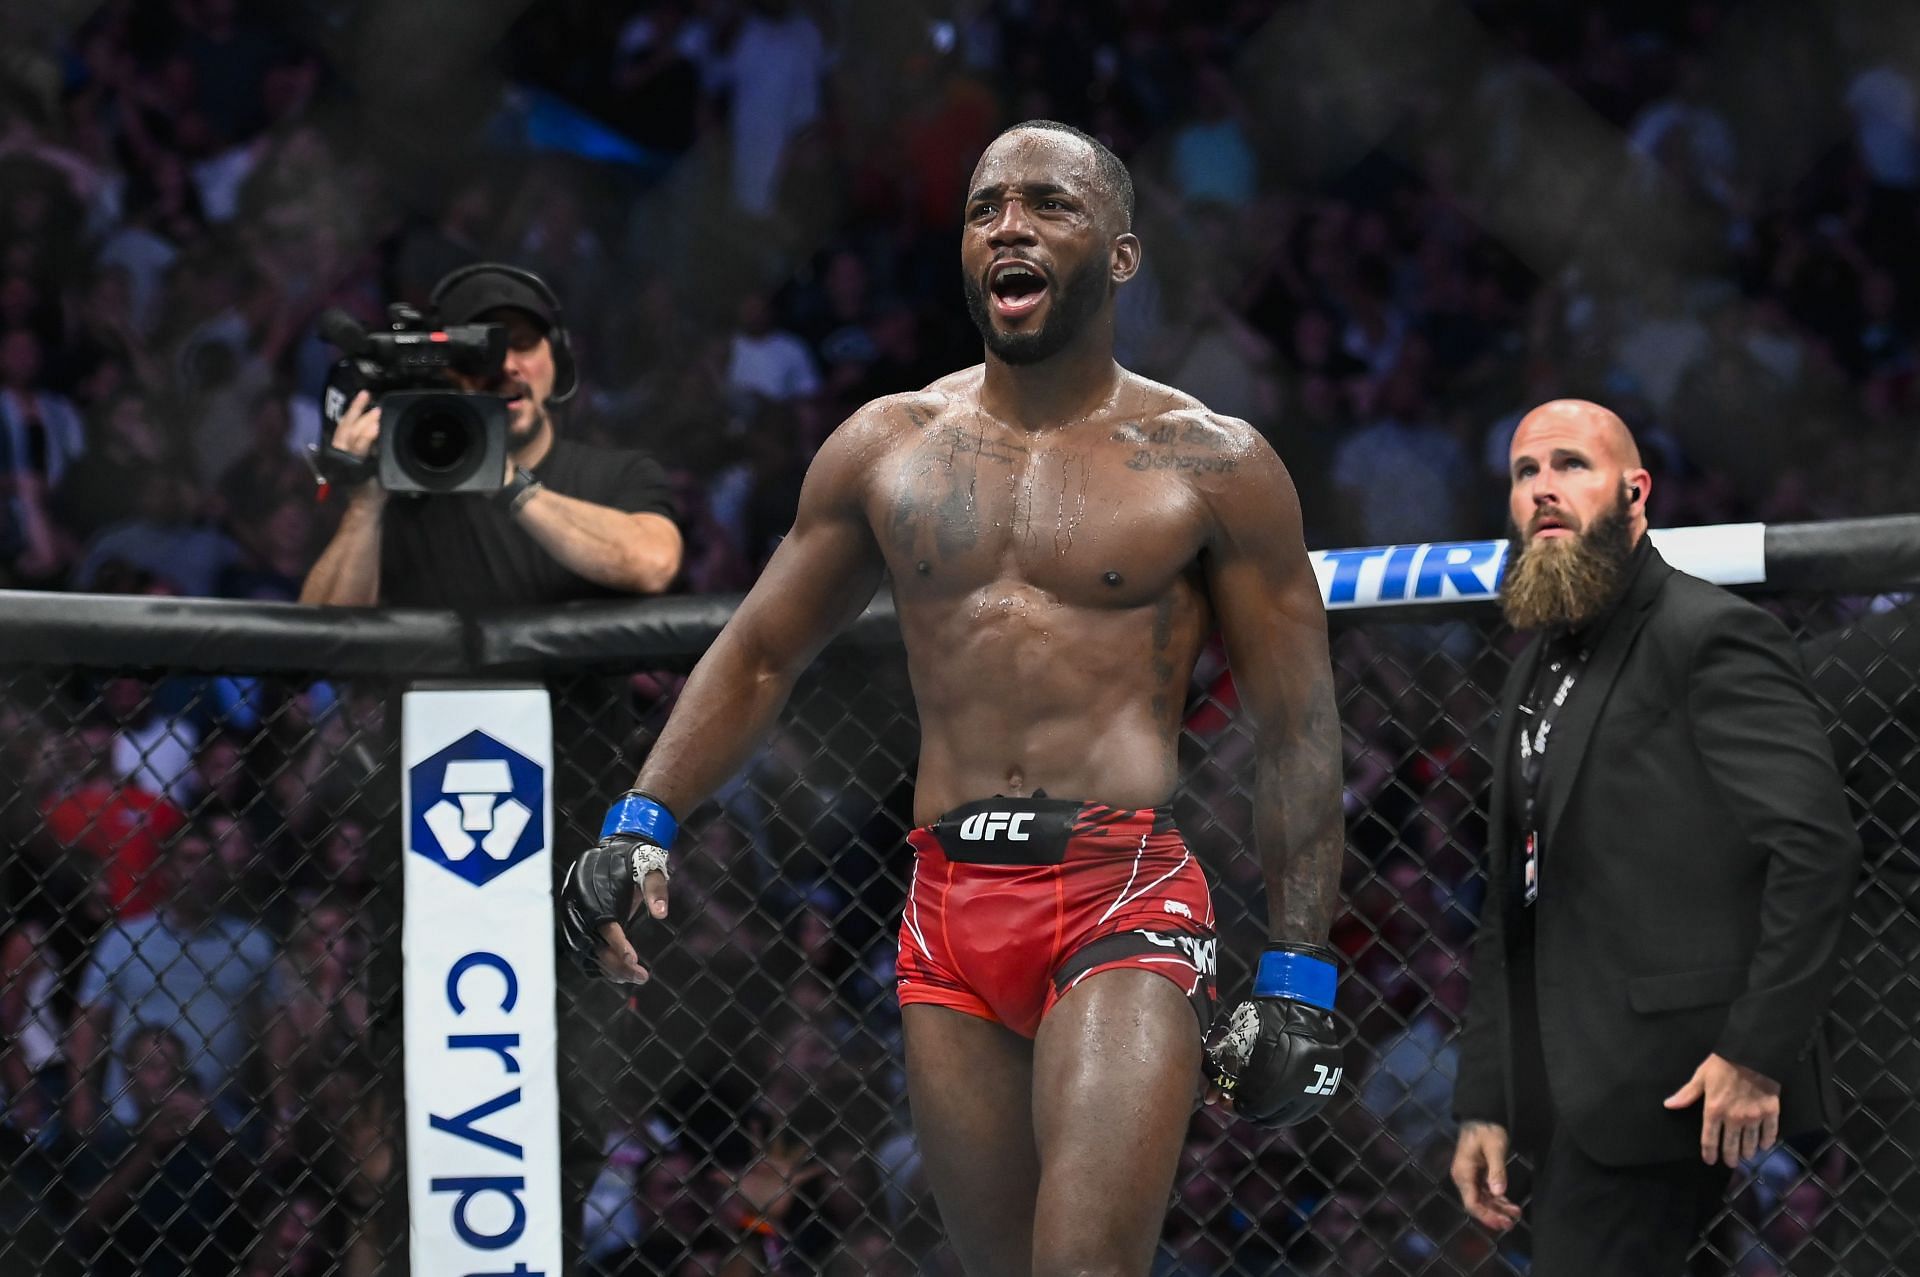 Can Leon Edwards repeat the feat and beat Kamaru Usman again when they rematch in March?